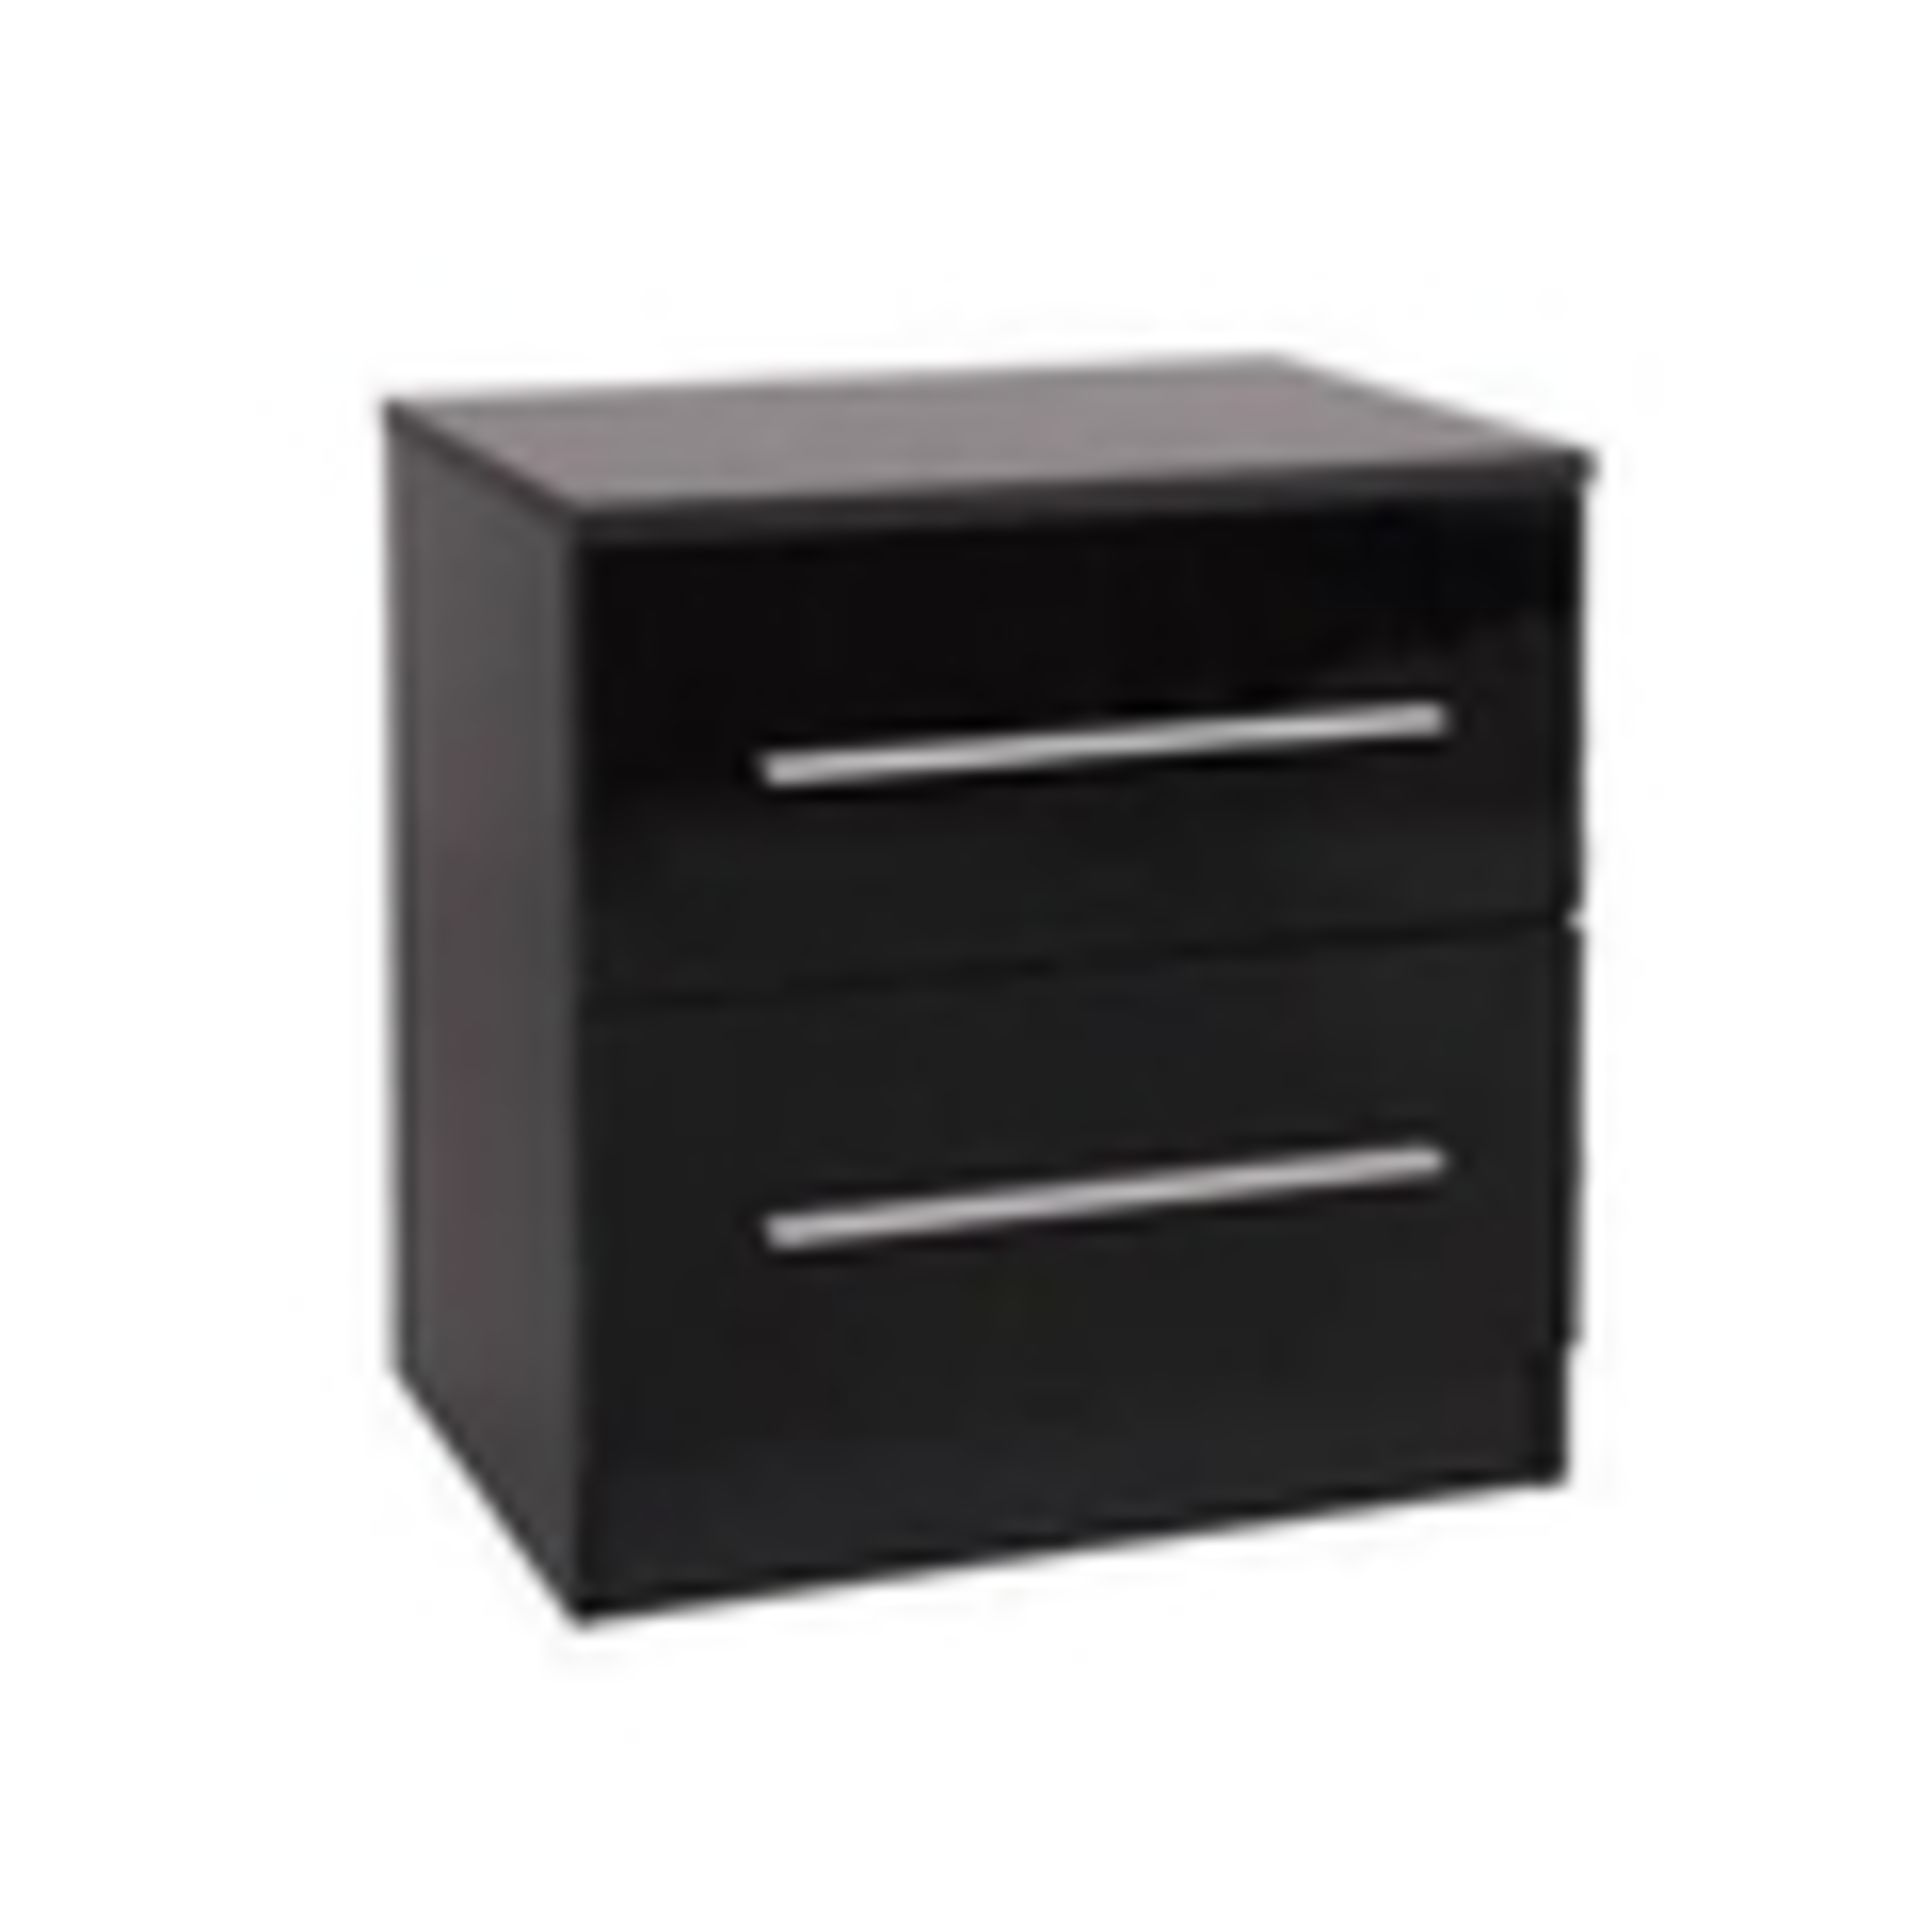 1 BRAND NEW BOXED TORONTO BLACK GLOSS 2 DRAWER BEDSIDE CABINET